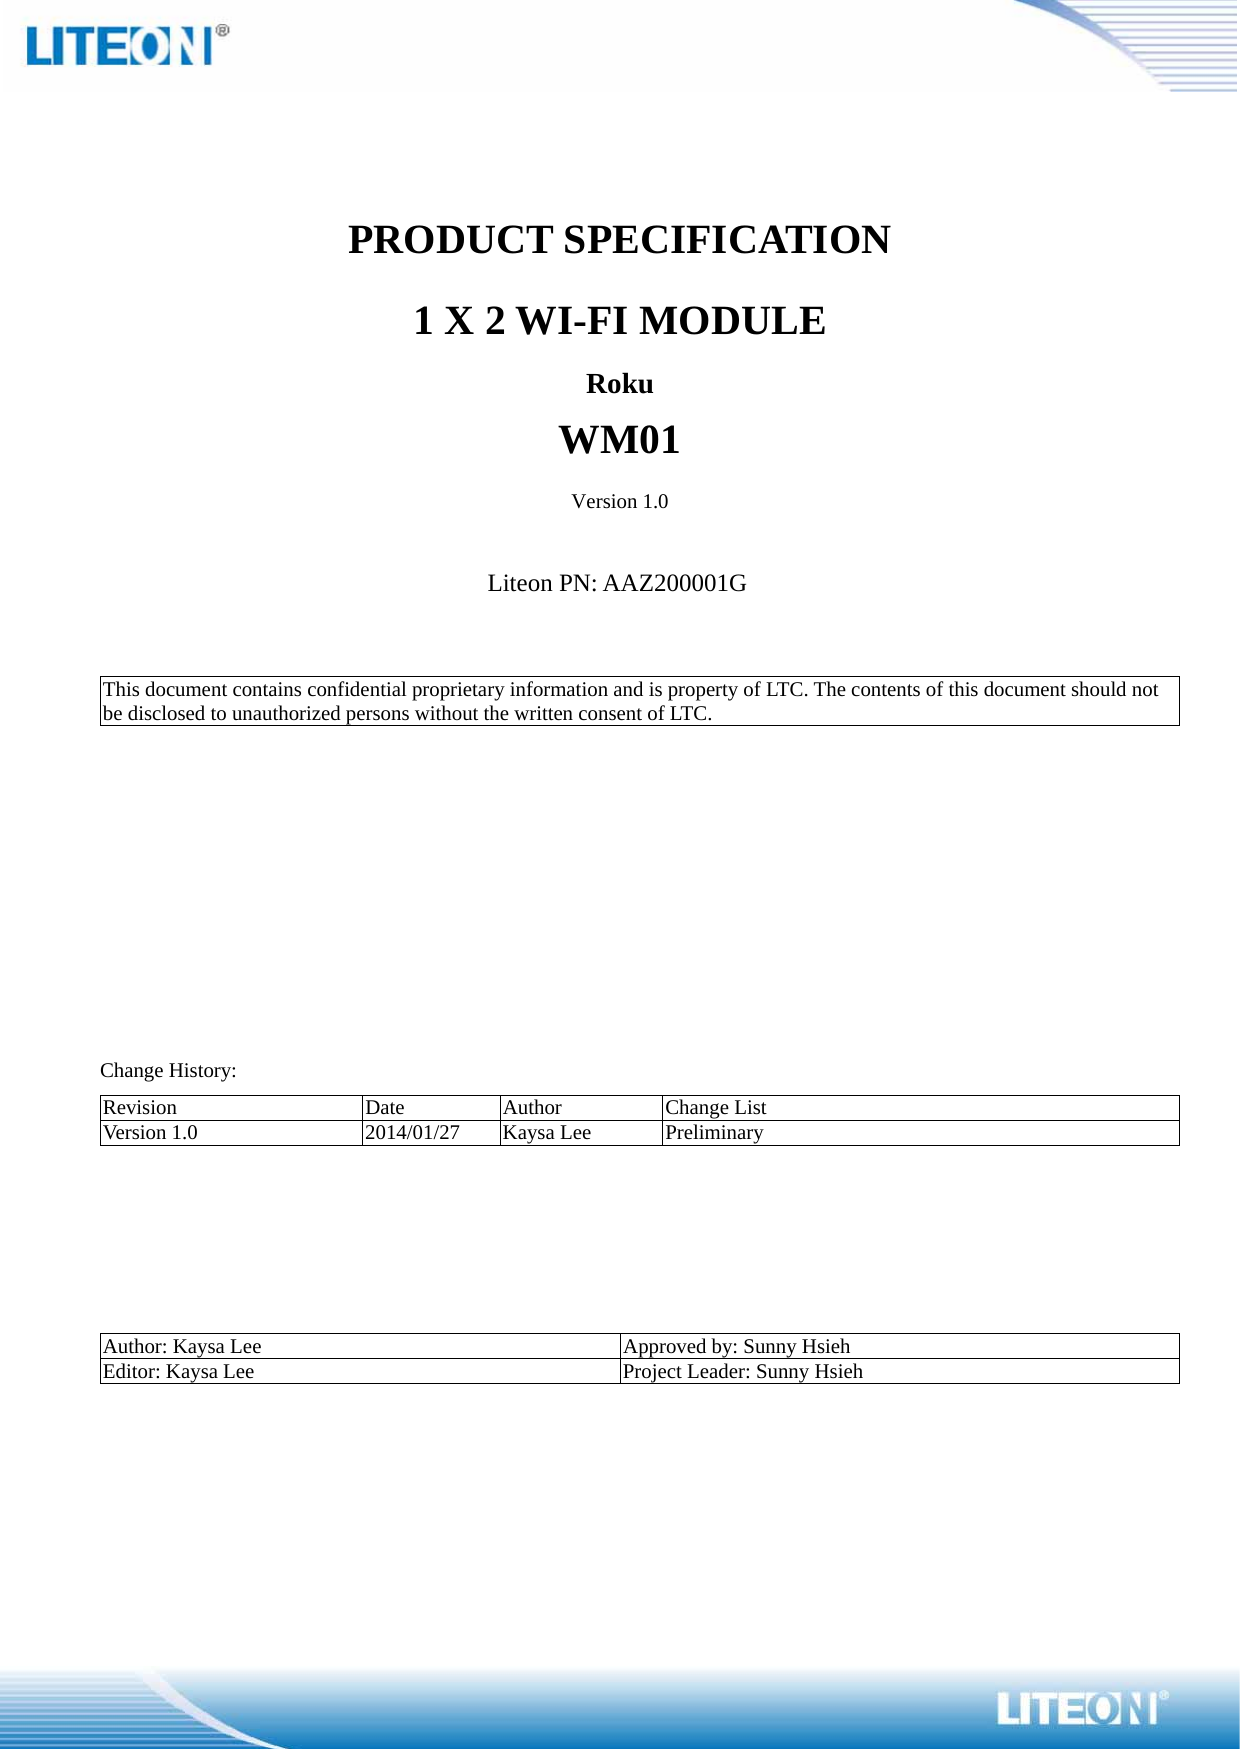    PRODUCT SPECIFICATION 1 X 2 WI-FI MODULE Roku WM01 Version 1.0  Liteon PN: AAZ200001G   This document contains confidential proprietary information and is property of LTC. The contents of this document should not be disclosed to unauthorized persons without the written consent of LTC.               Change History: Revision Date Author Change List Version 1.0  2014/01/27  Kaysa Lee  Preliminary      Author: Kaysa Lee  Approved by: Sunny Hsieh Editor: Kaysa Lee  Project Leader: Sunny Hsieh 